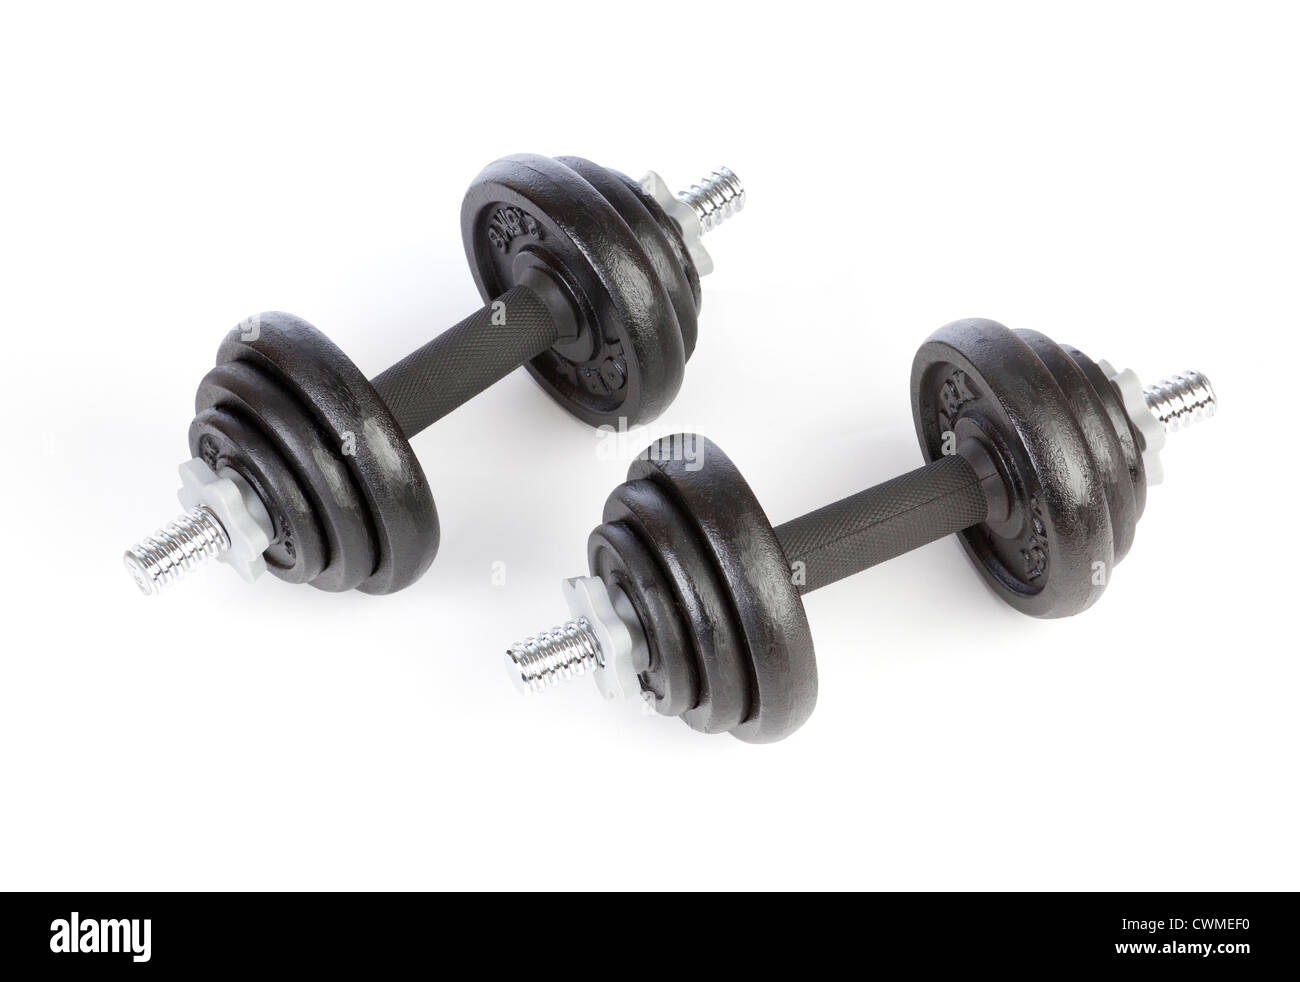 dumbbell weights made of cast iron Stock Photo